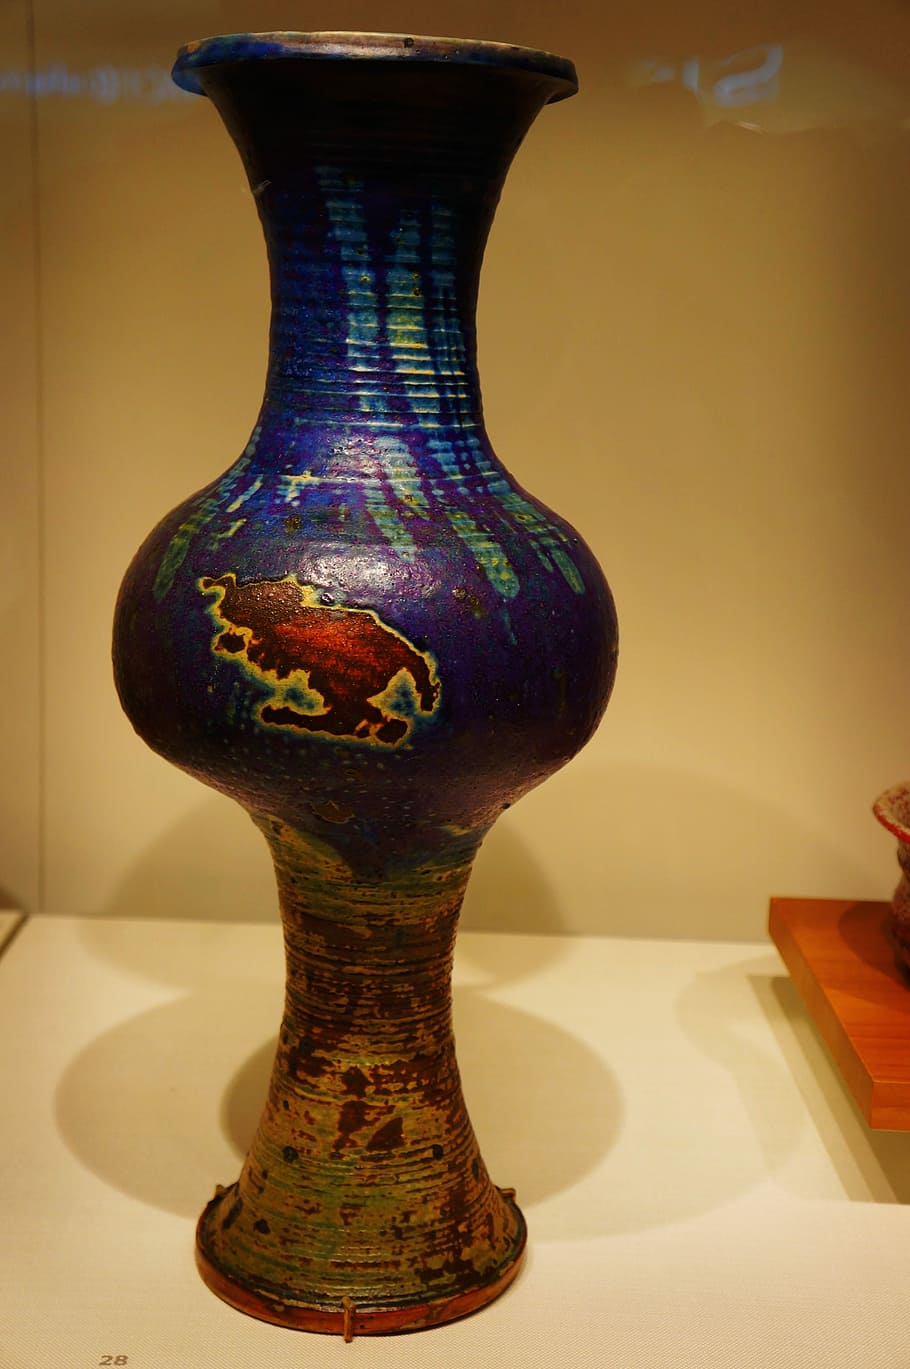 Pottery, Vase, Pot, Clay, Ceramic, blue, decoration, traditional, brown, design